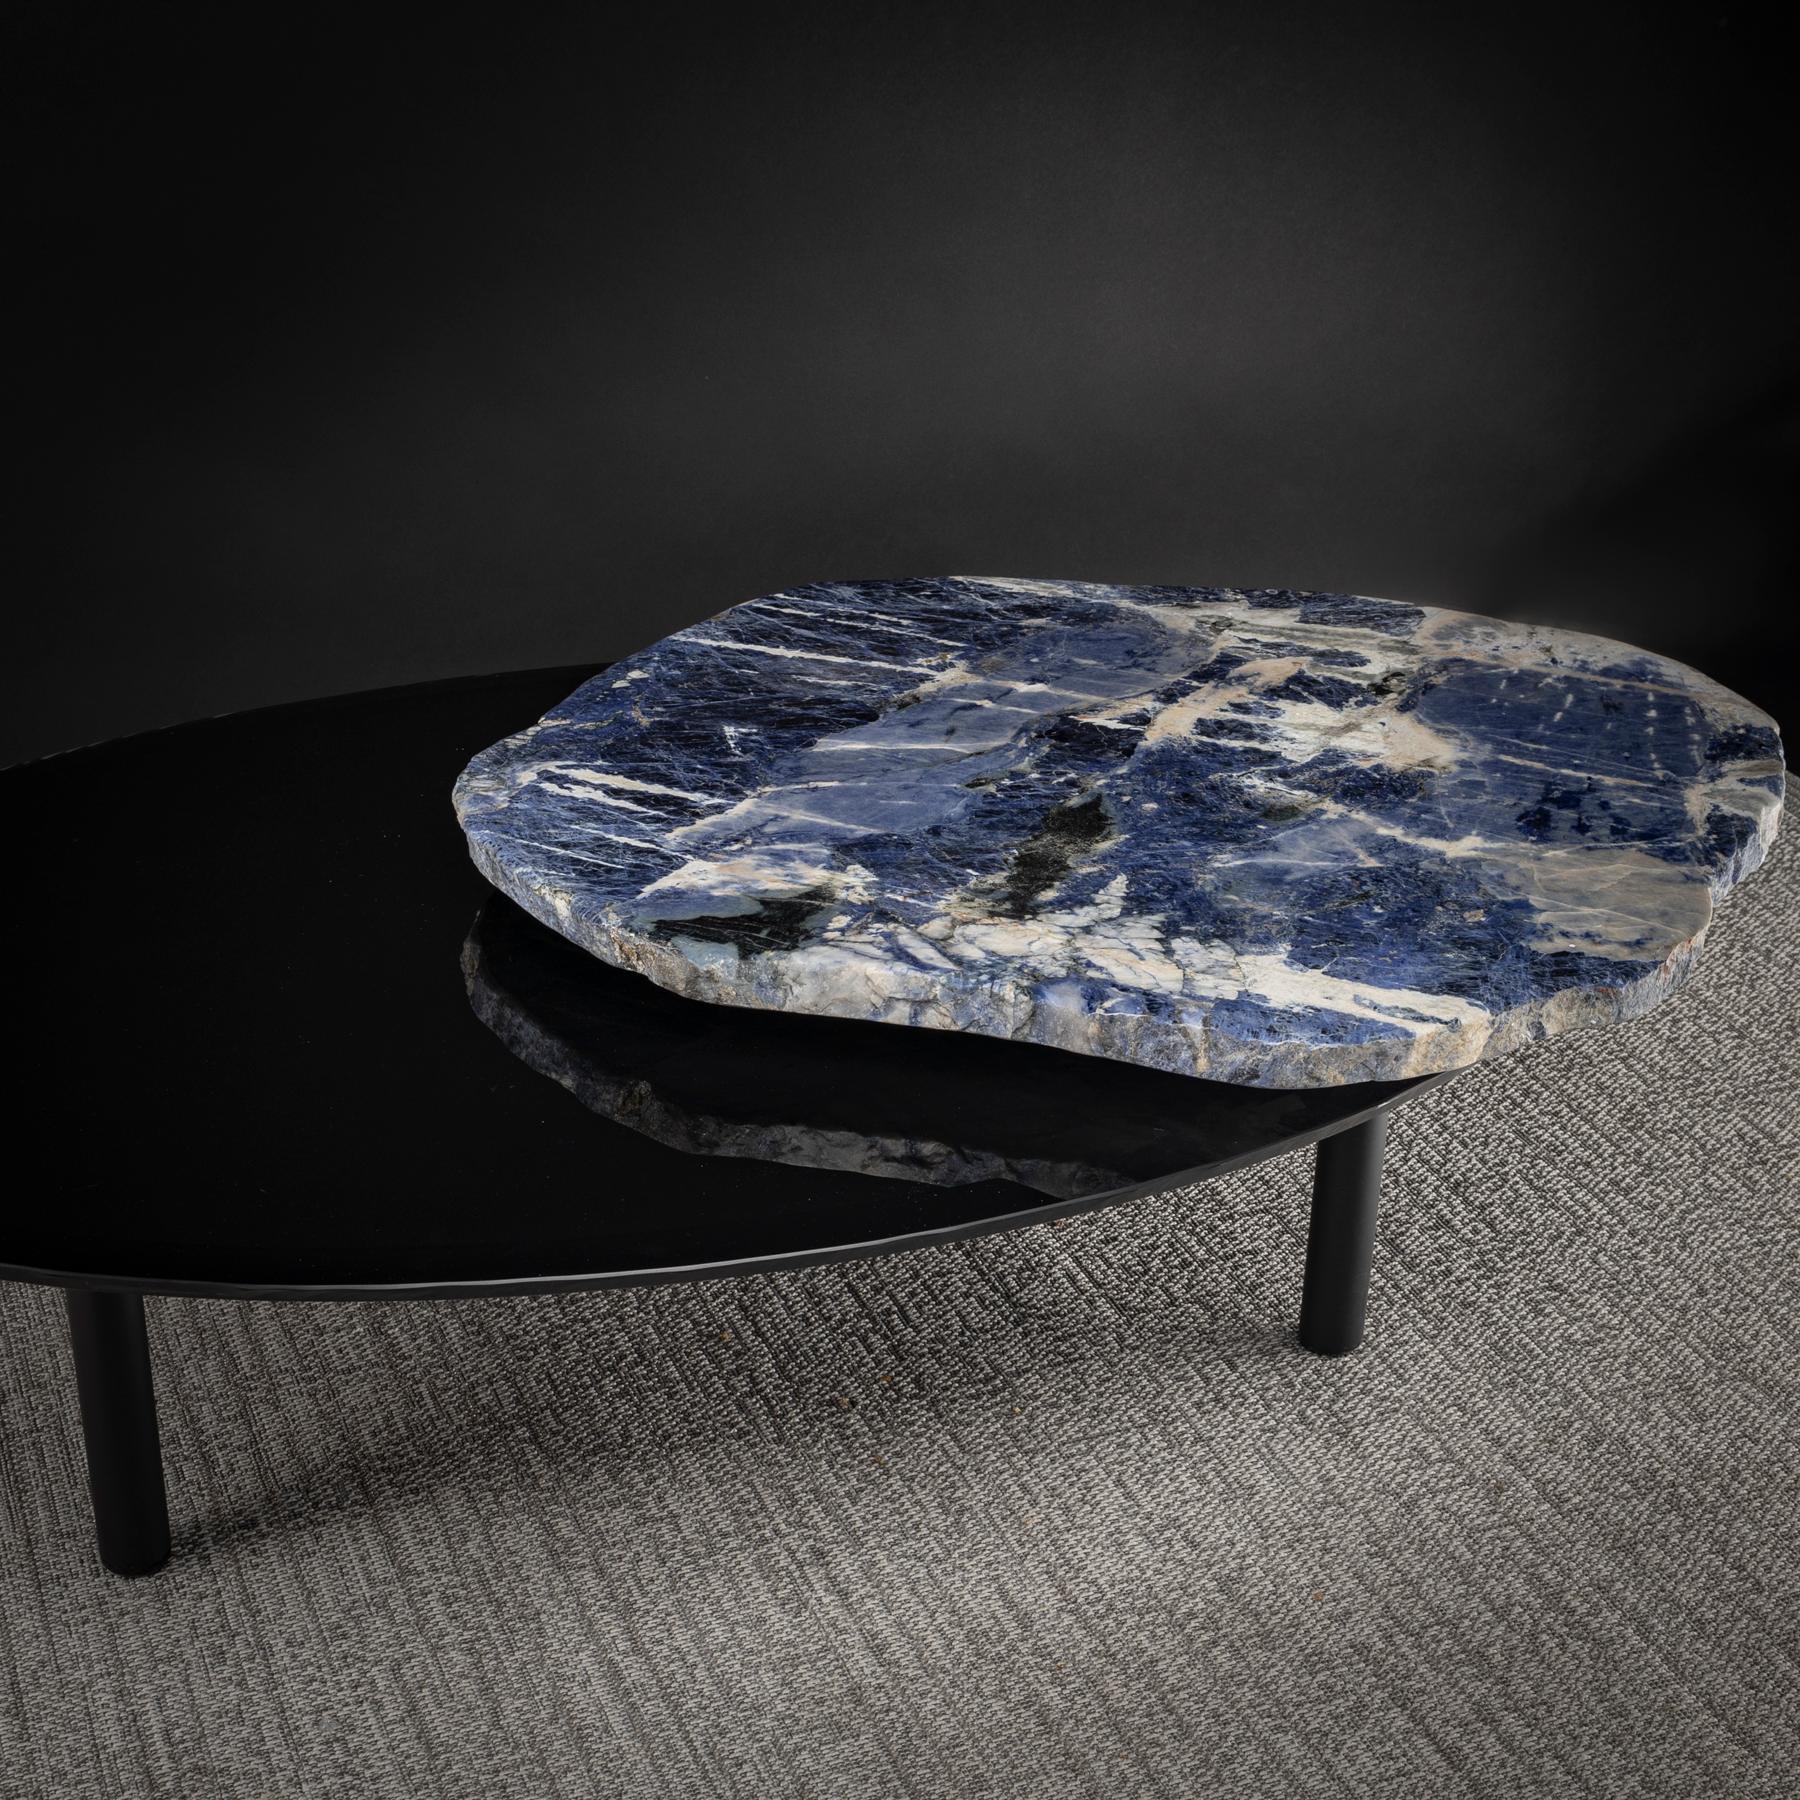 Center Table, with Rotating Brazilian Sodalite Slab on Black Tempered Glass 1